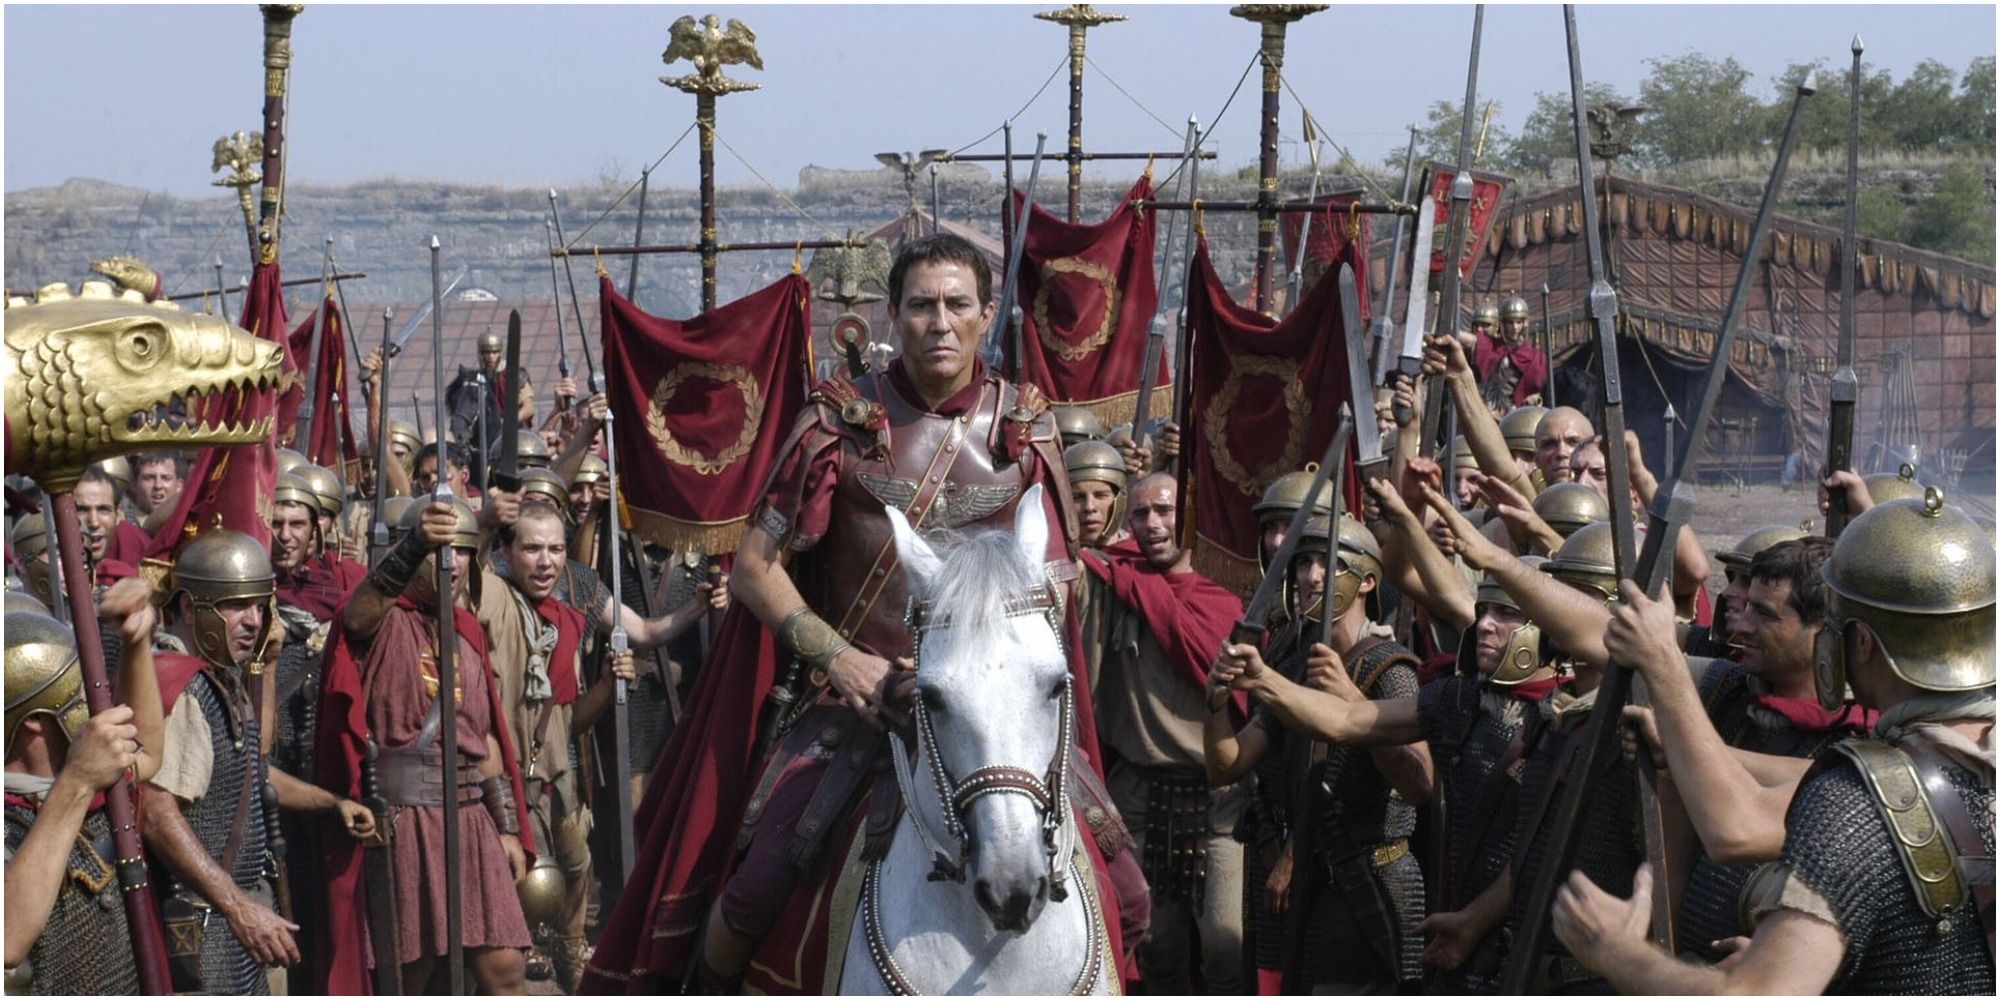 HBO series Rome large crowd of roman soldiers holding up weapons surrounding one on horseback